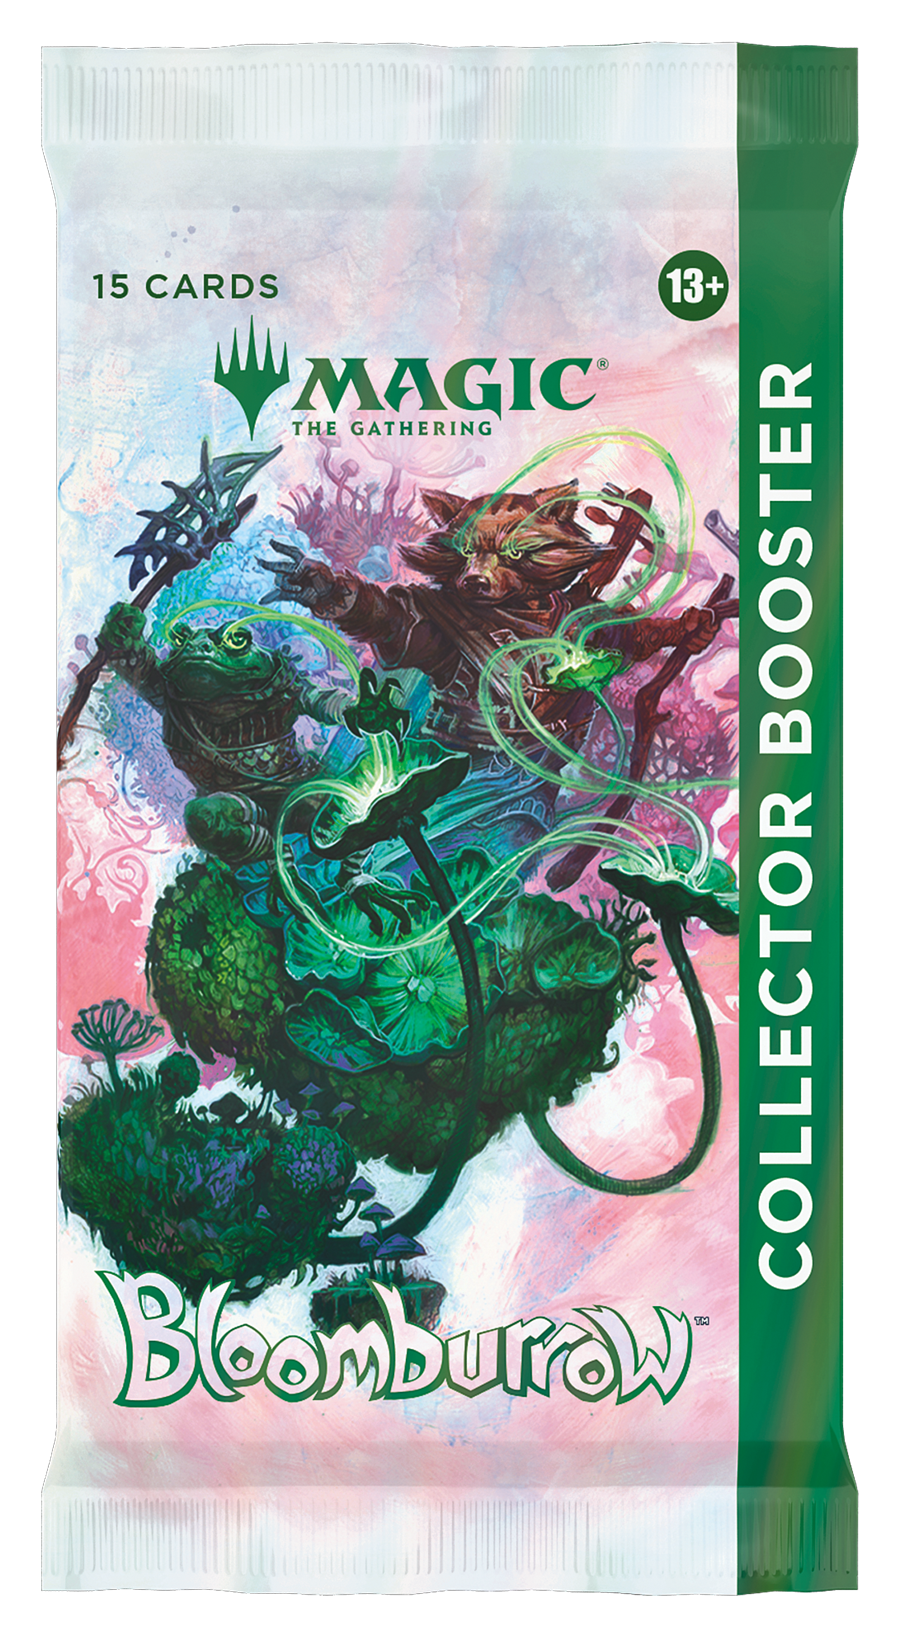 Magic : The Gathering - Bloomburrow - Coffret Booster Collector 